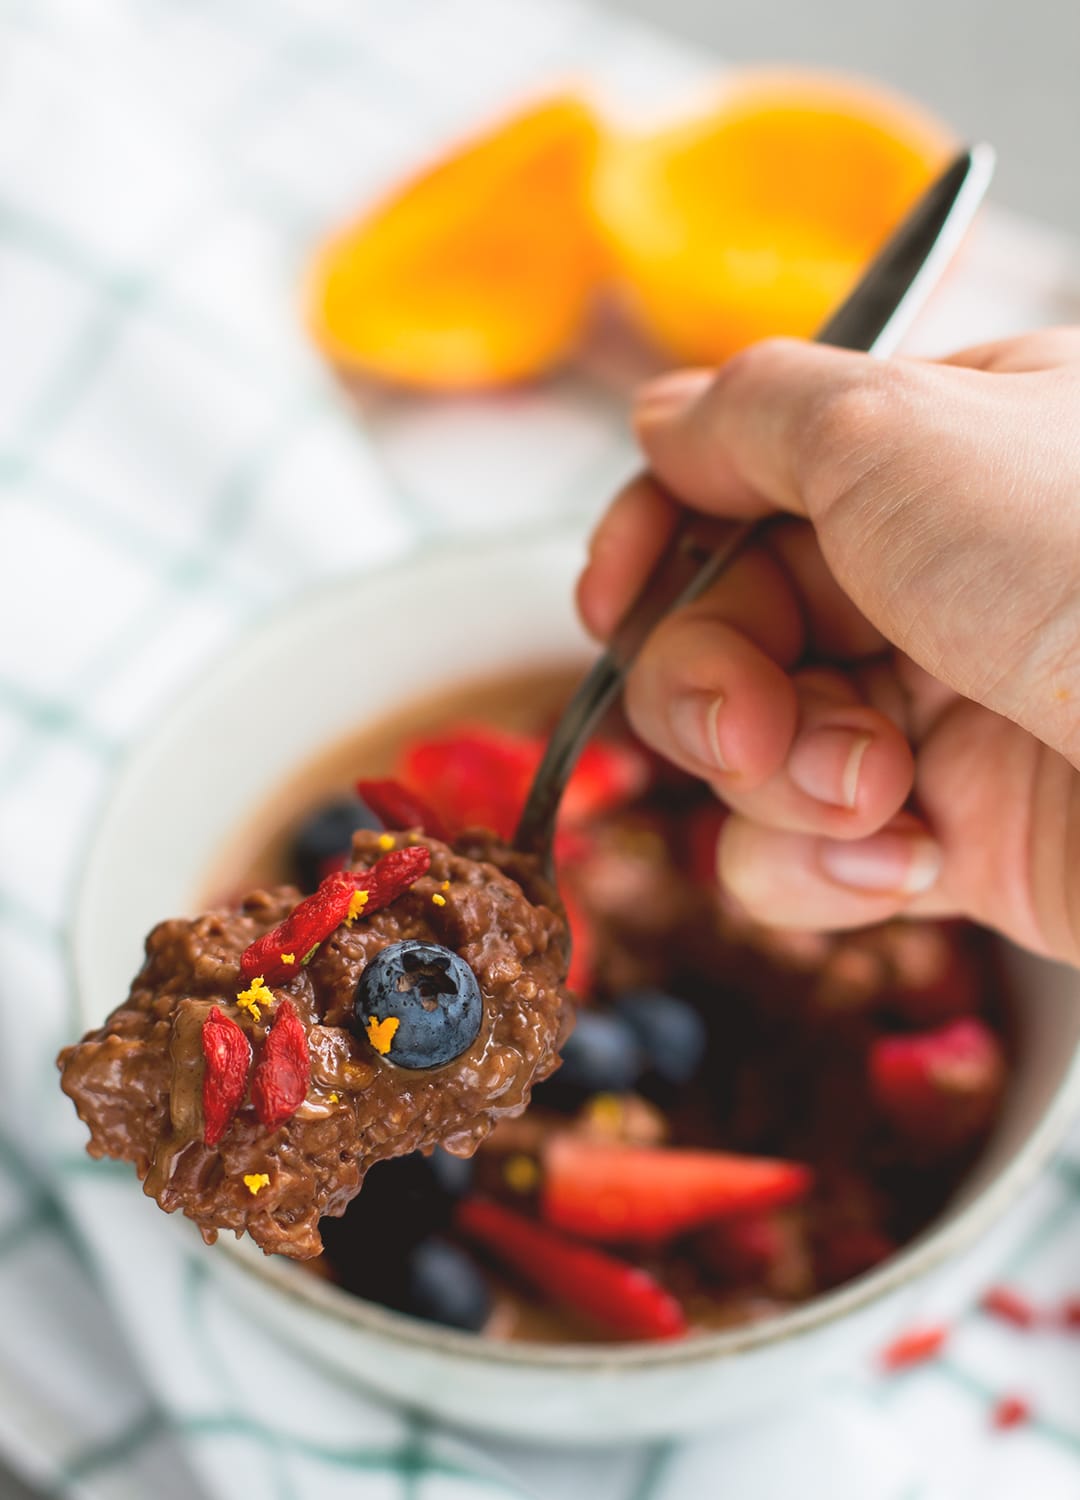 Chocolate Oatmeal with Orange Zest - delicious chocolatey oatmeal recipes that's easy to make and really tasty! I love the orange chocolate combiniation! This literally tastes like a dessert. Vegan, gluten-free, and good for you! | thehealthfulideas.com 